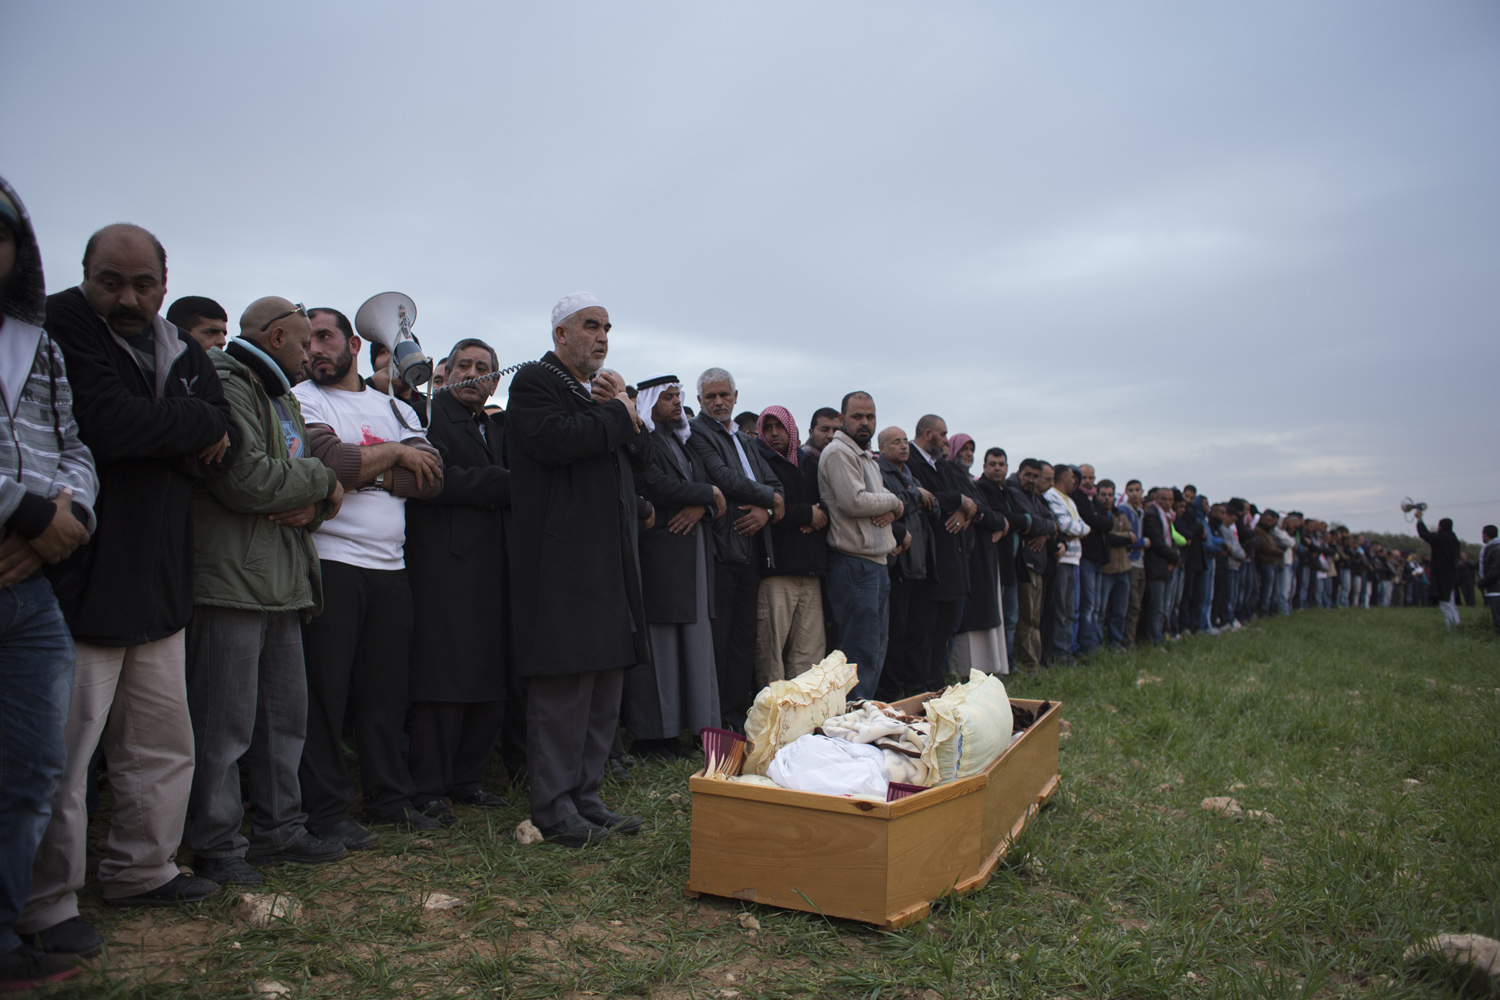 Funeral of Sami Ziadna in the southern Bedouin city of Rahat, Israel, 19.1.2015. Sami died a day earlier following clashes with Israeli police during the funeral of another Bedouin man who was killed a week earlier by Israeli policemen in the city (photo: Oren Ziv/Activestills)